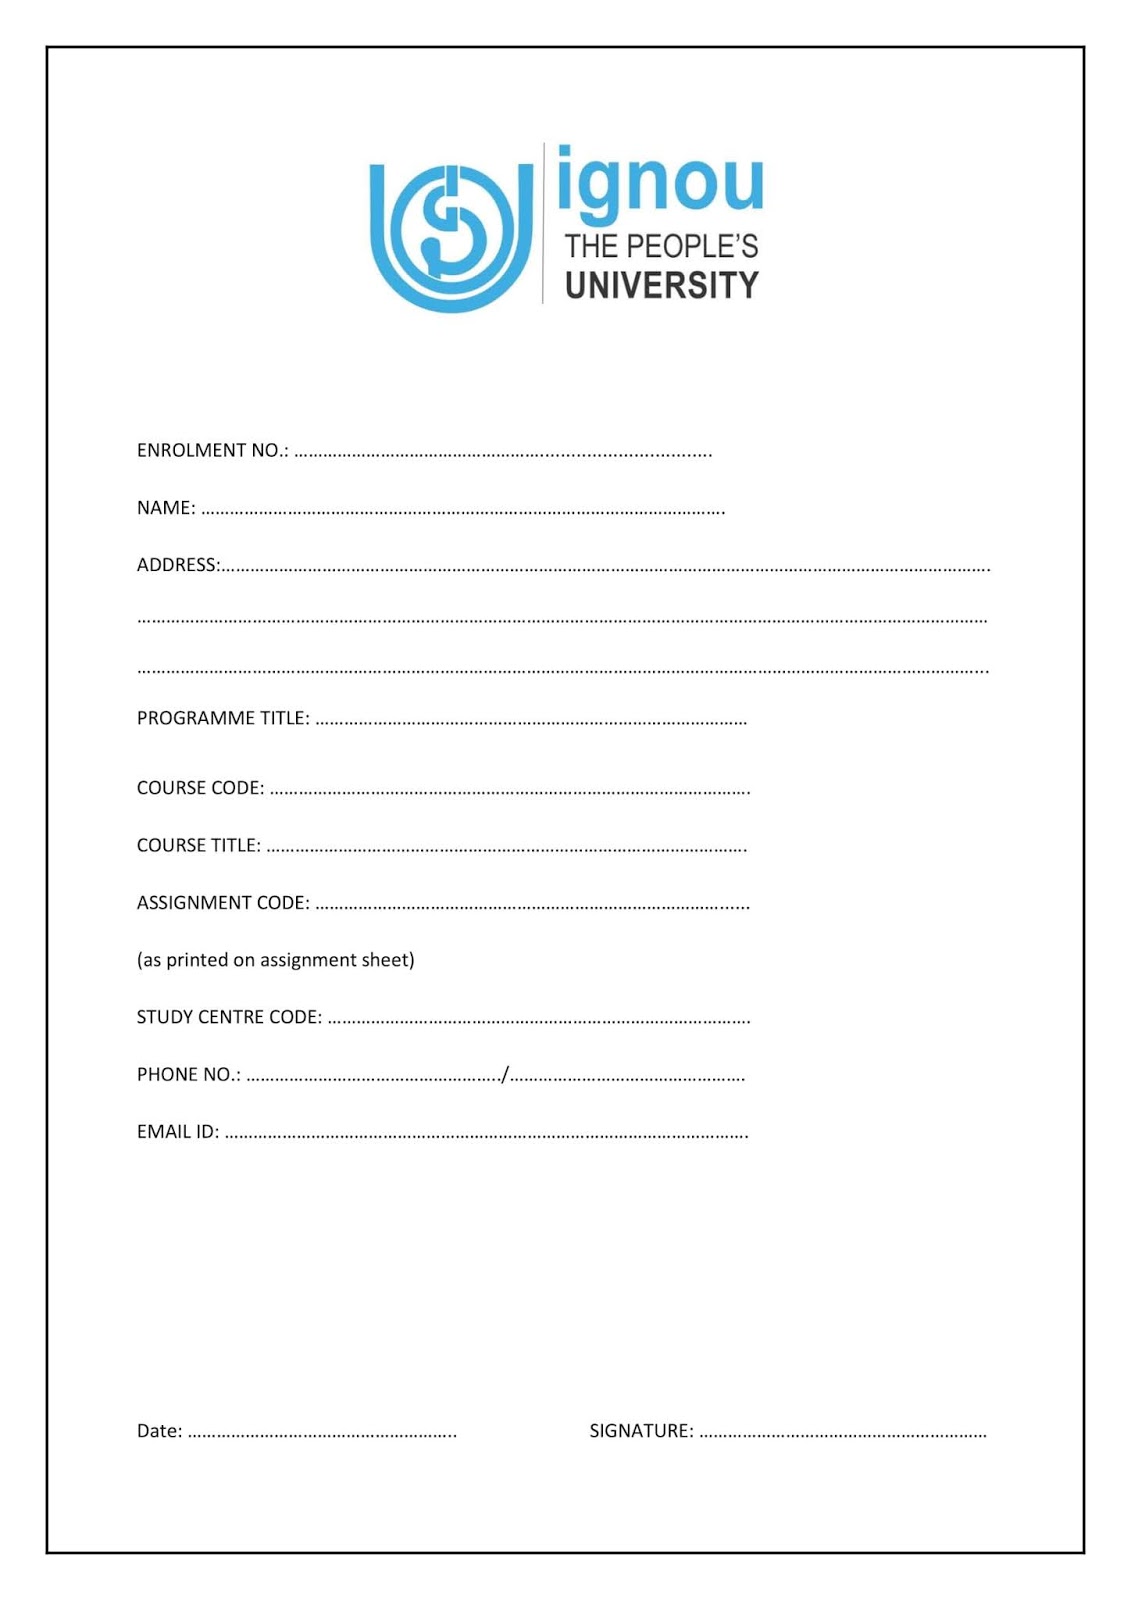 ignou assignment pdf front page